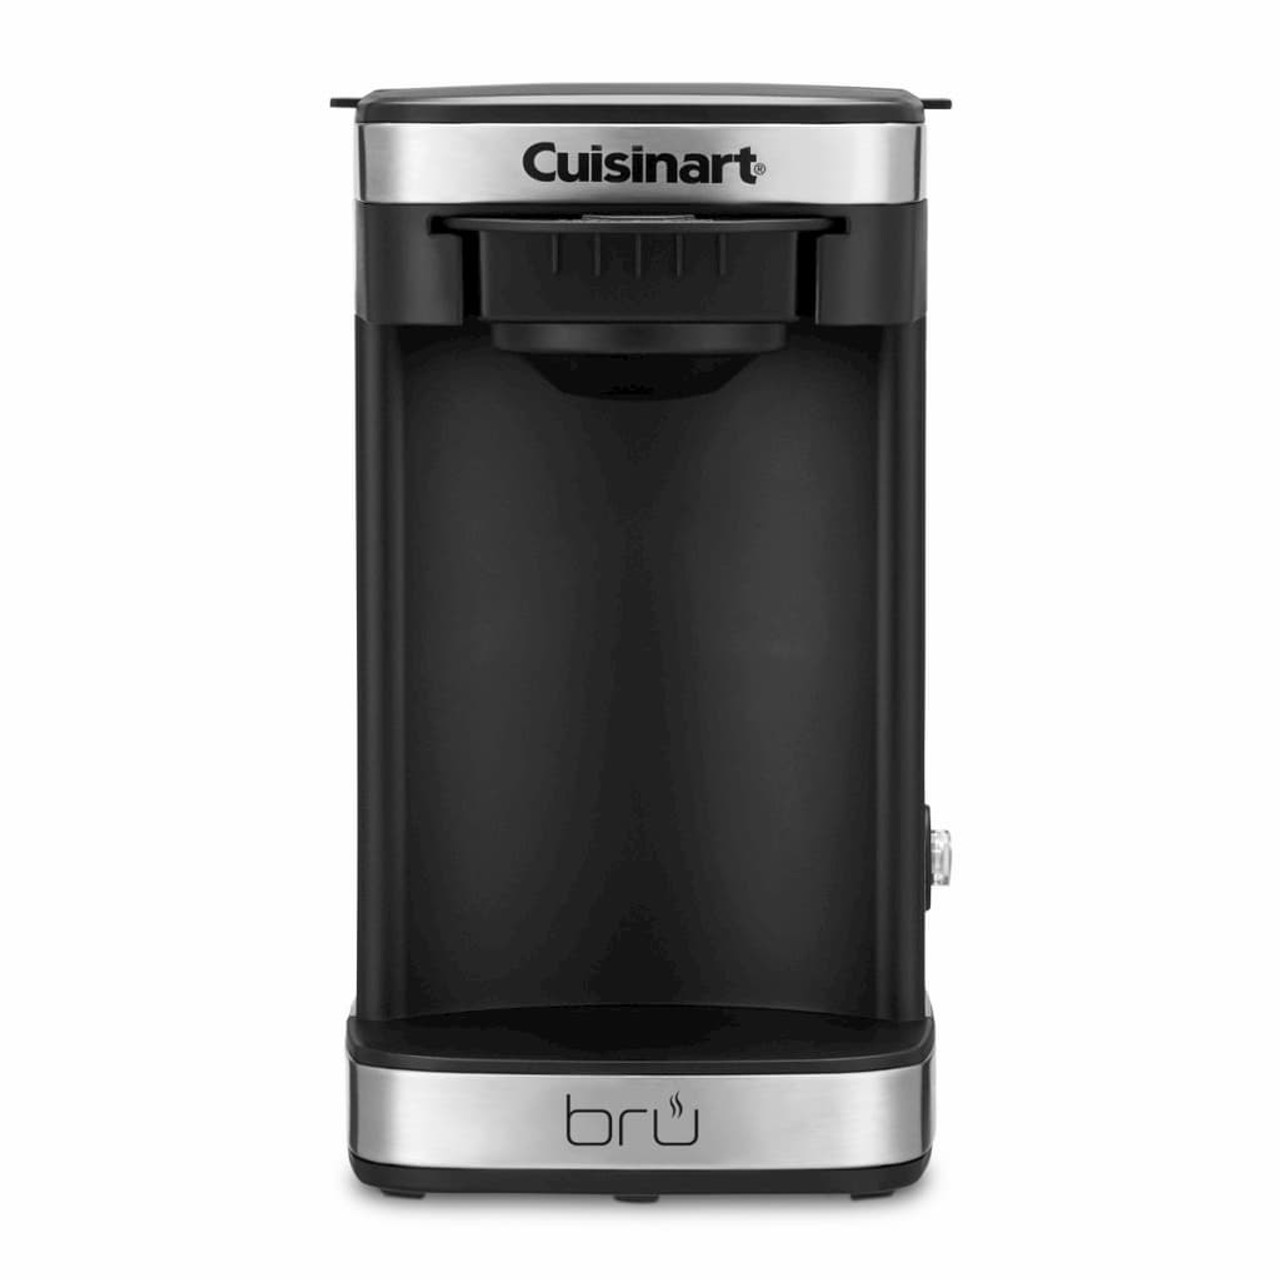 Conair WCM11S Cuisinart 2-Cup Stainless Steel Brewer